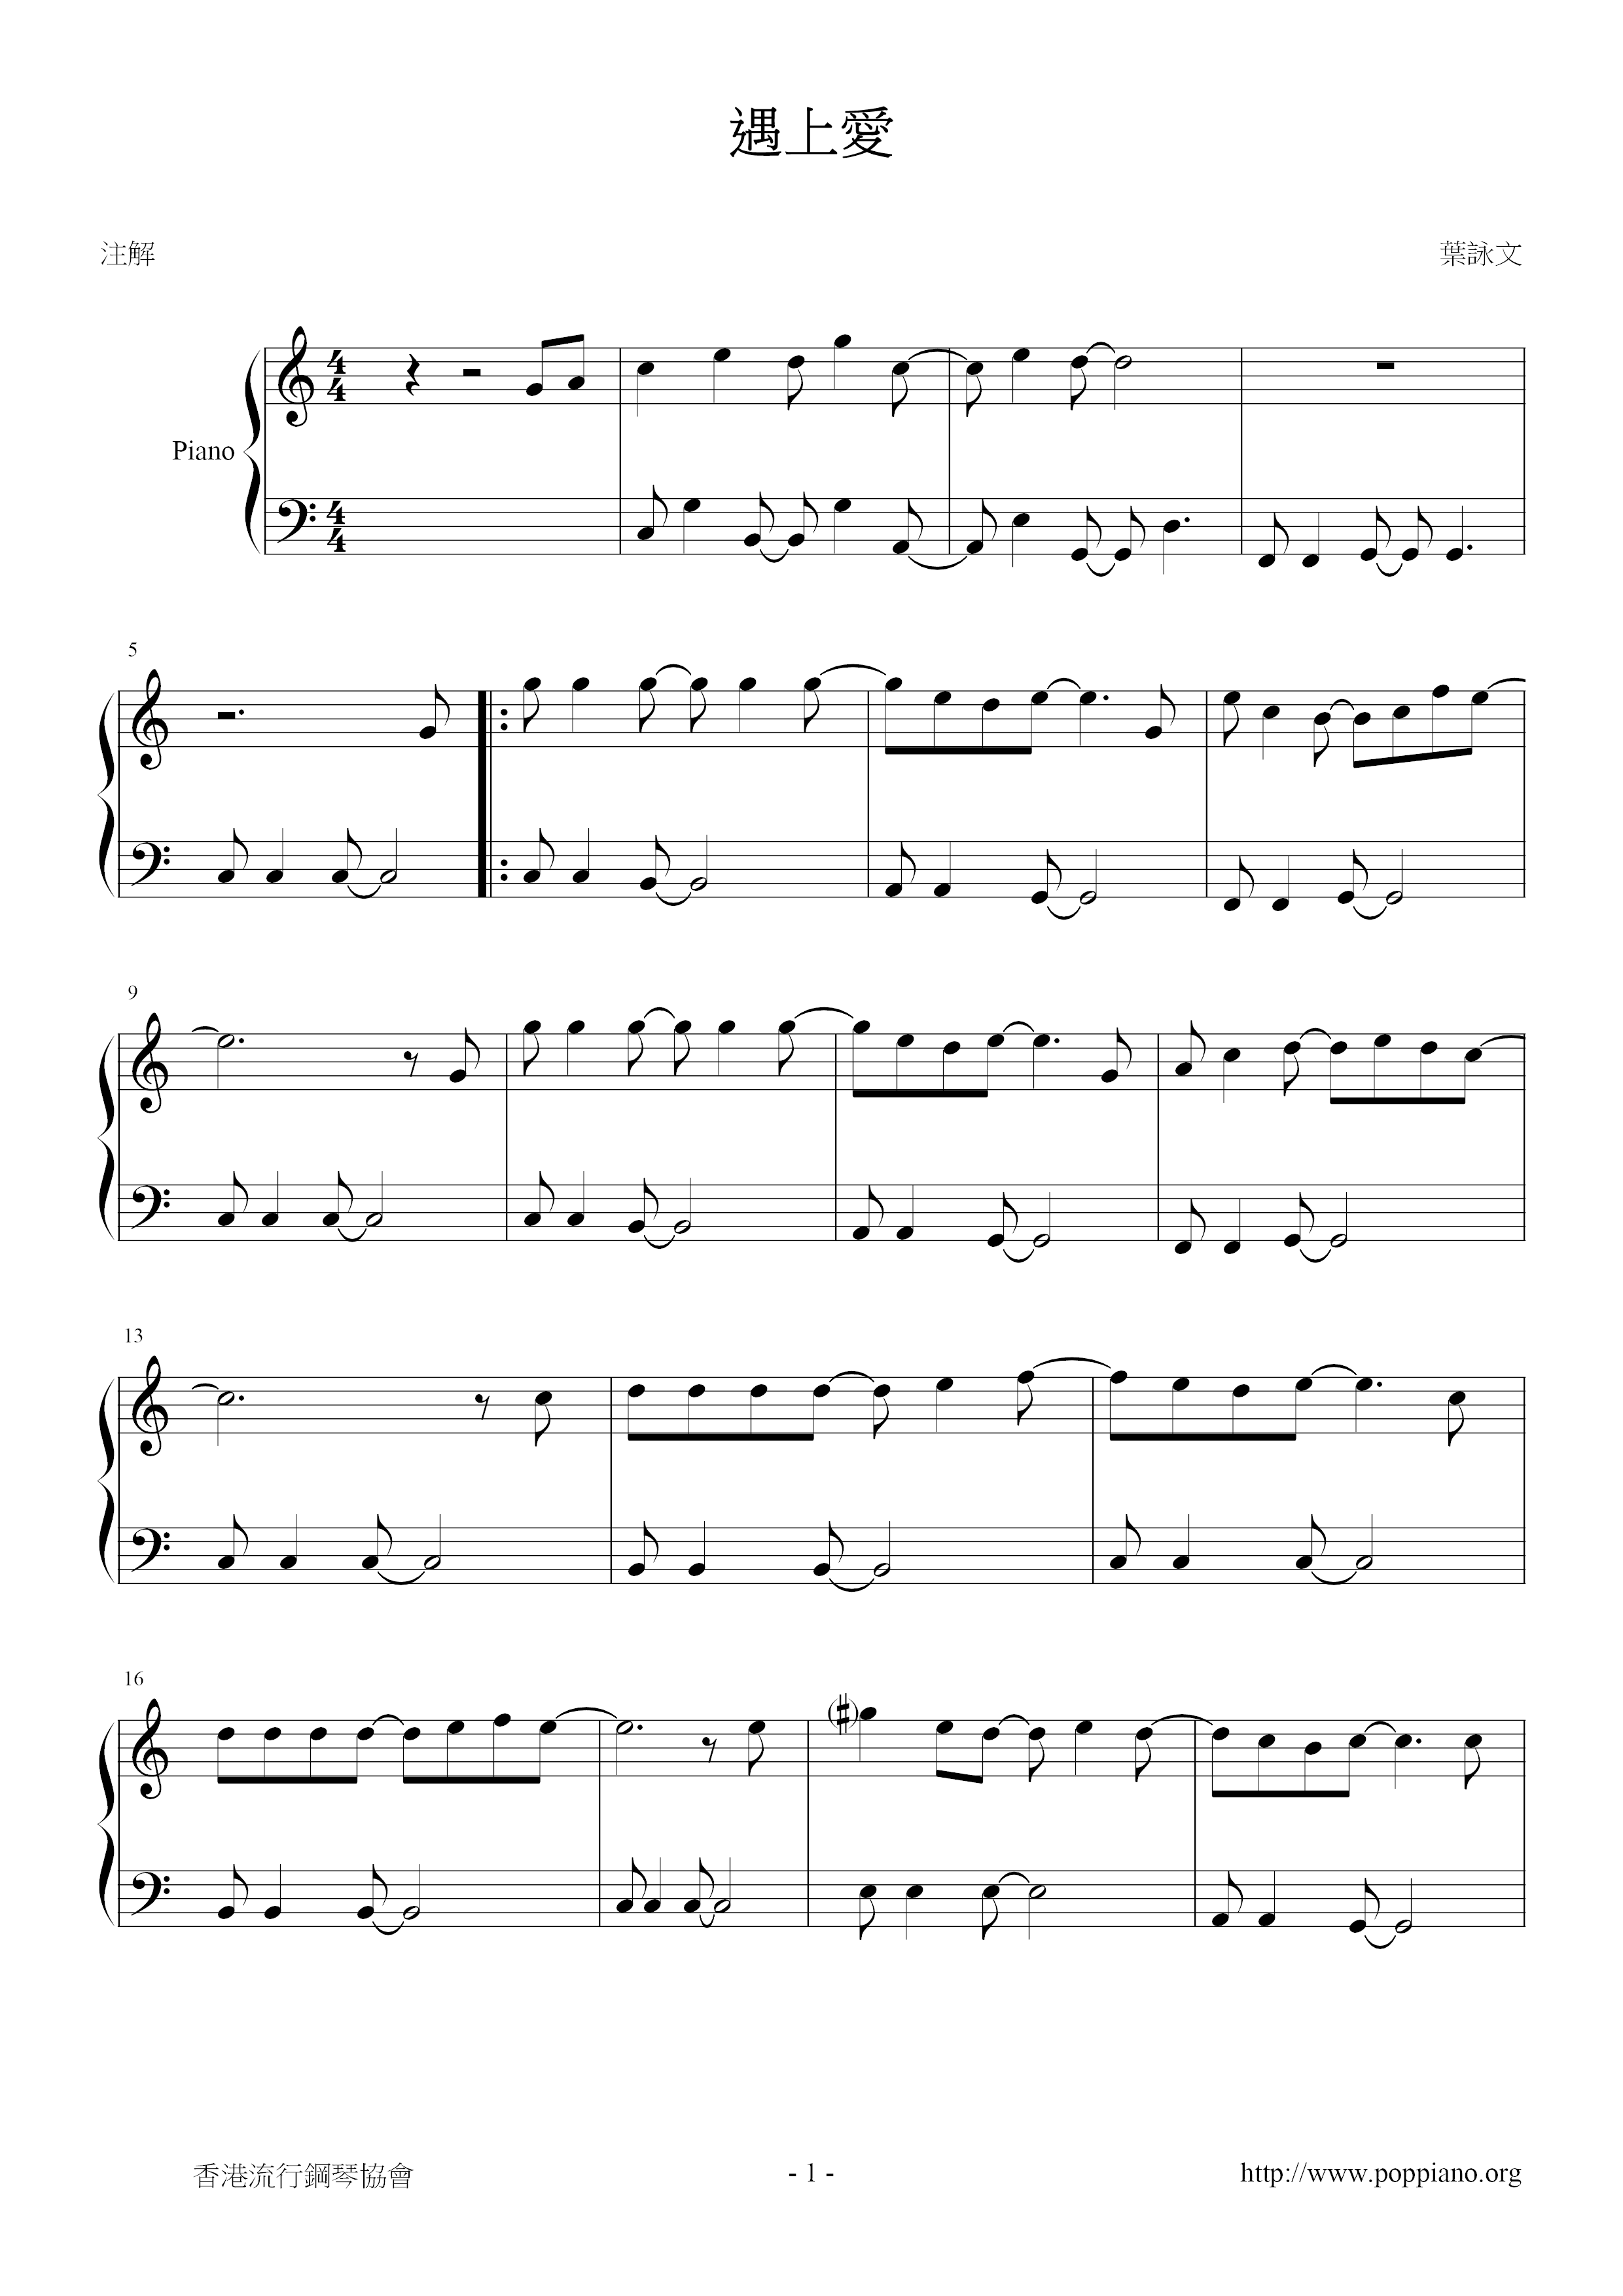 Encounter With Love Score